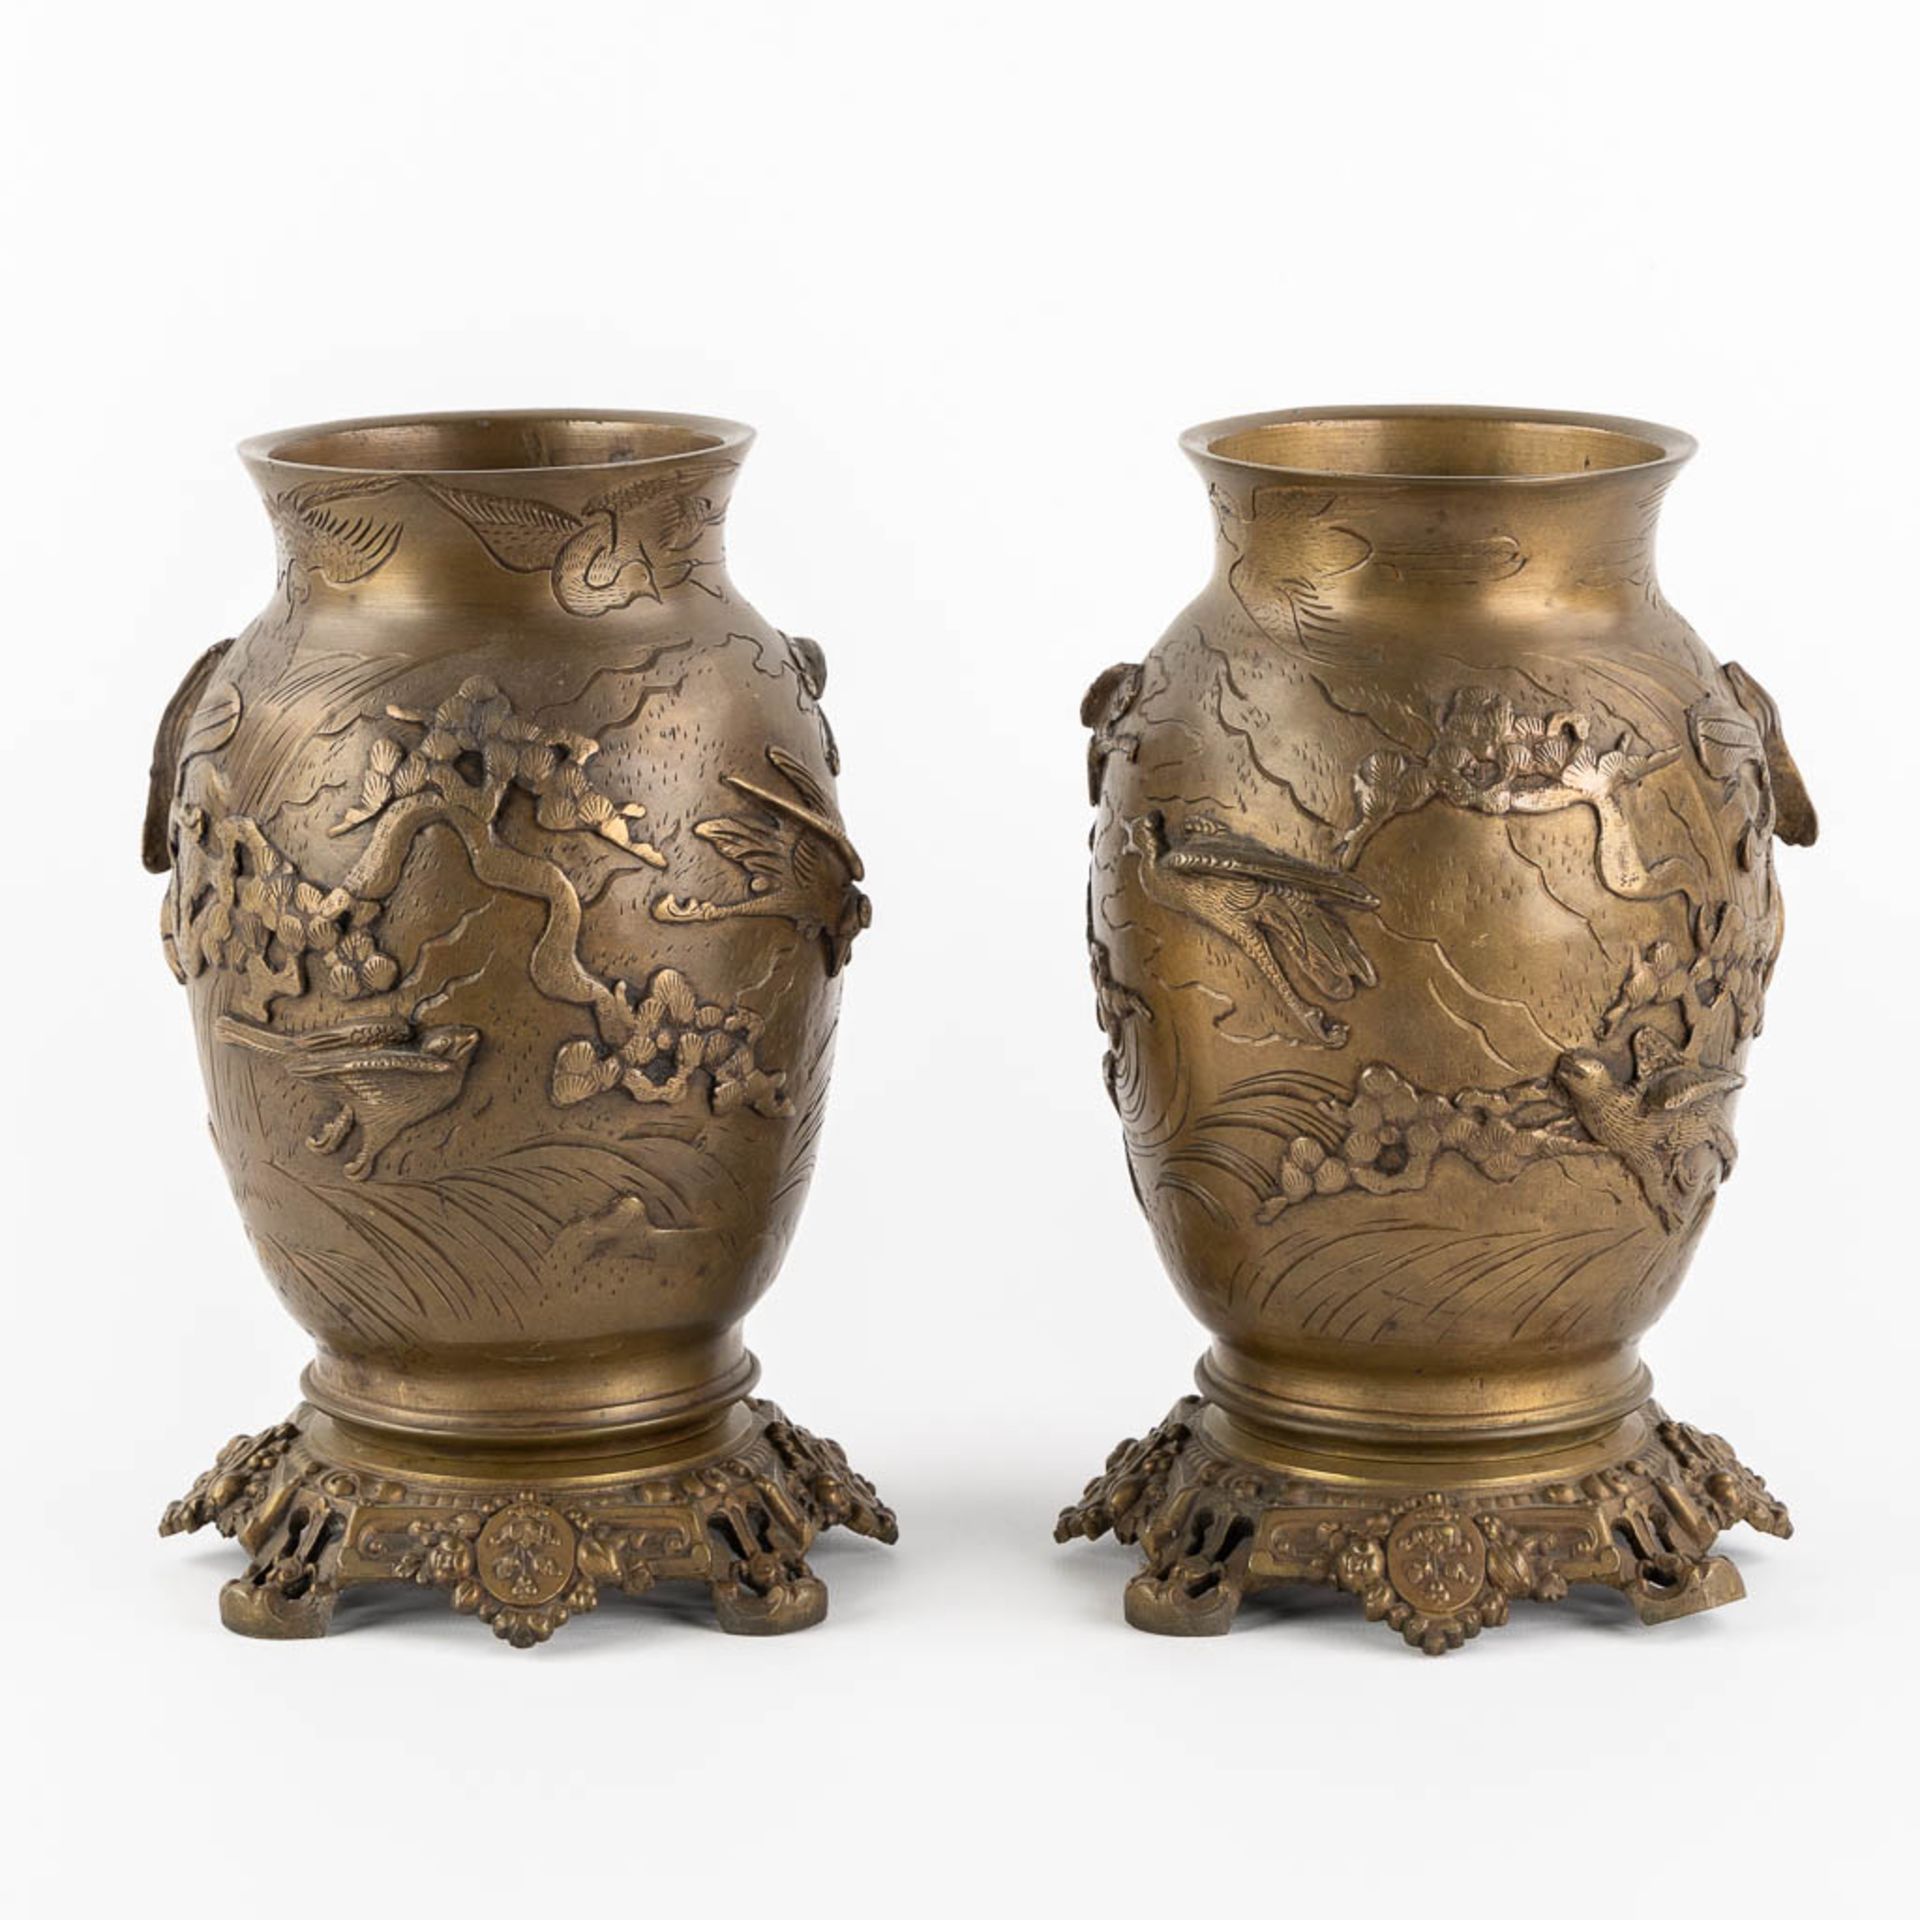 A pair of Oriental vases, depicting flying birds and trees. Patinated bronze. (H:27 x D:16 cm) - Image 5 of 16